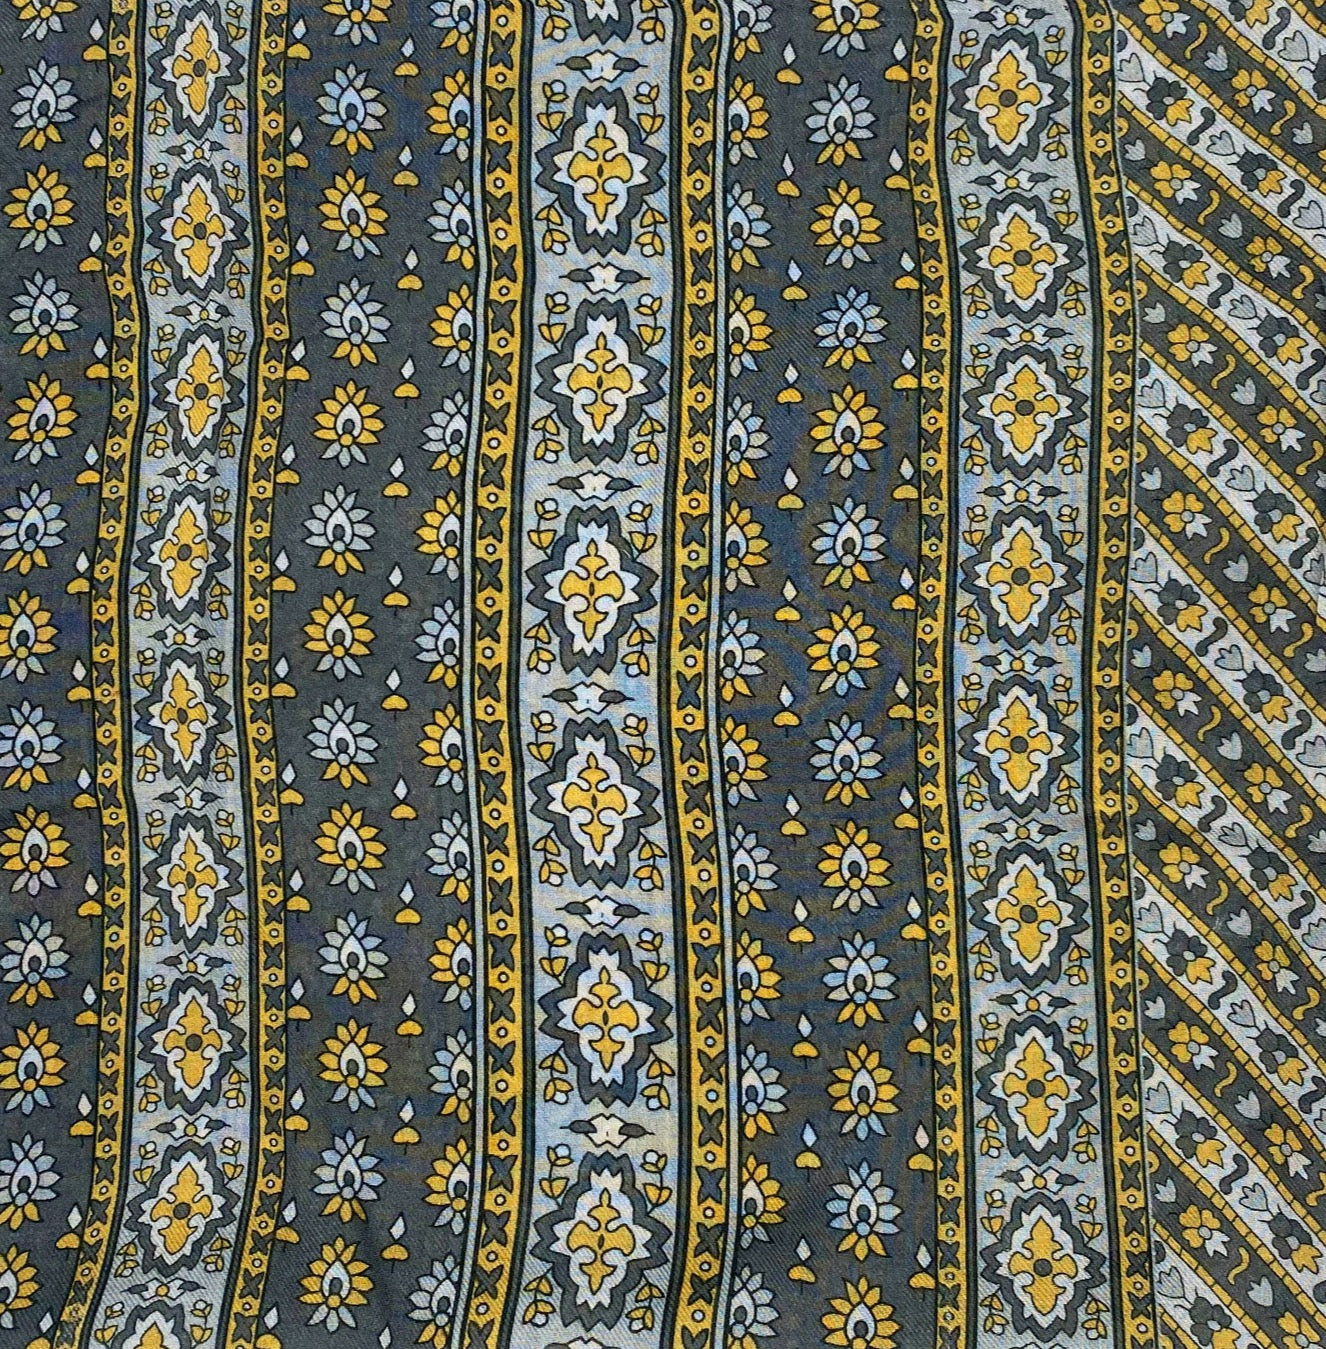 A flat, folded view of 'The Whitehorse' boho wide scarf. Clearly showing the decorative and floral-inspired patterns in yellow, grey and silver.